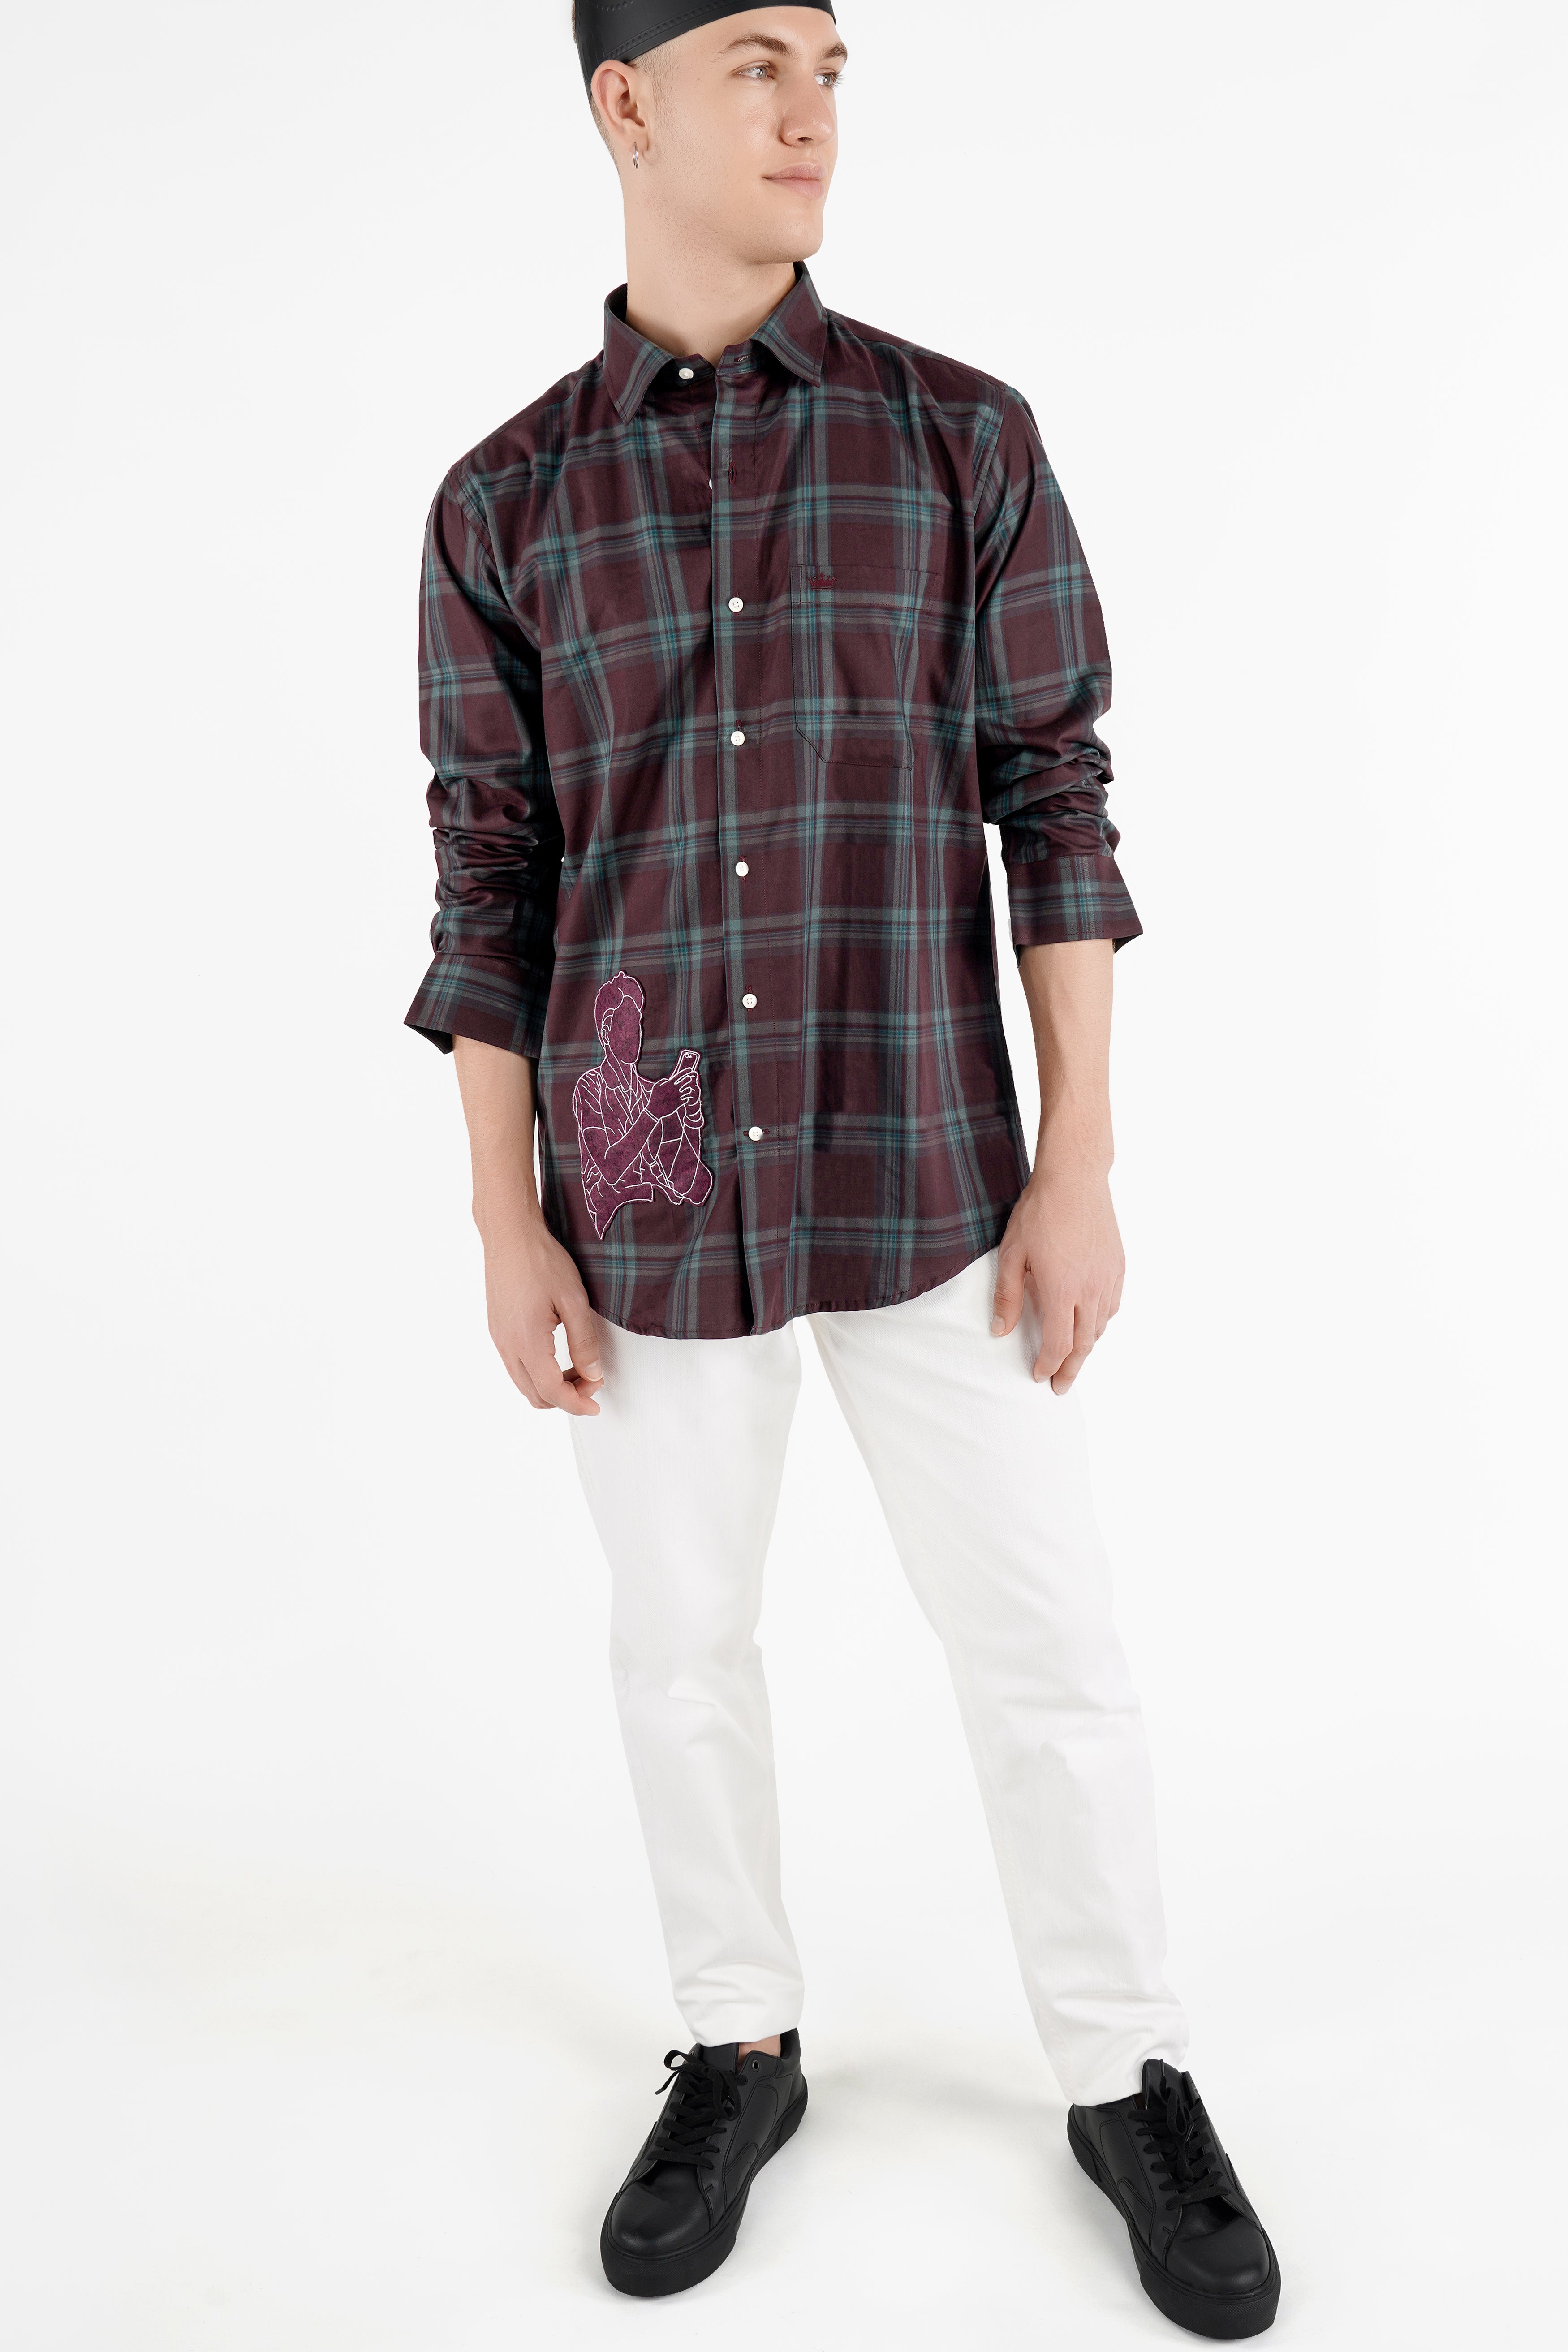 Crater Port Maroon with Gable Green Checkered with Patchwork Twill Premium Cotton Designer Shirt